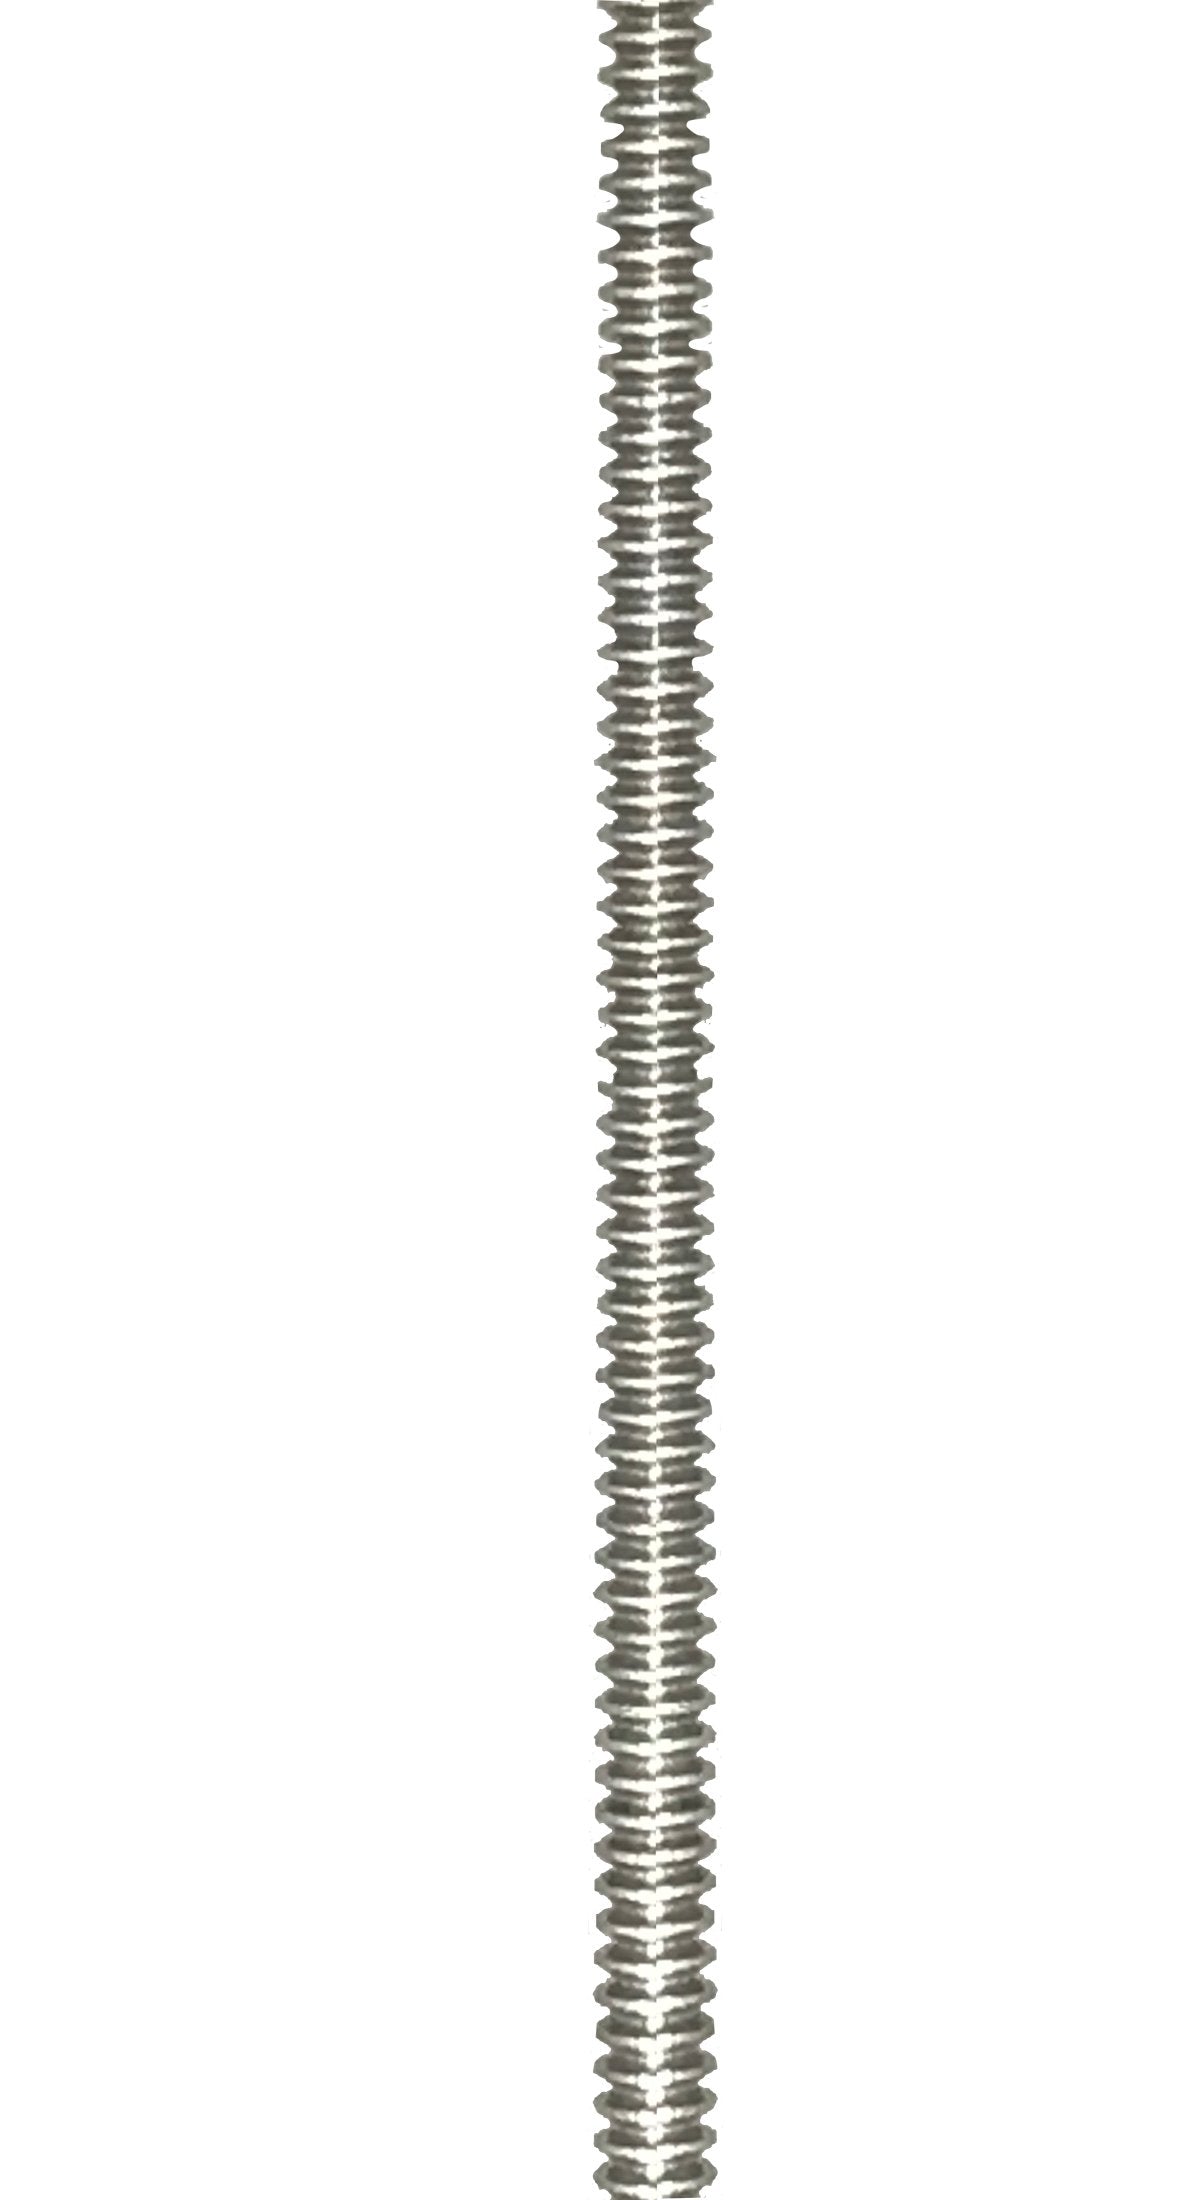 Dubro 2-56 STAINLESS STEEL FULLY THREADED RODS (12" / 305MM)